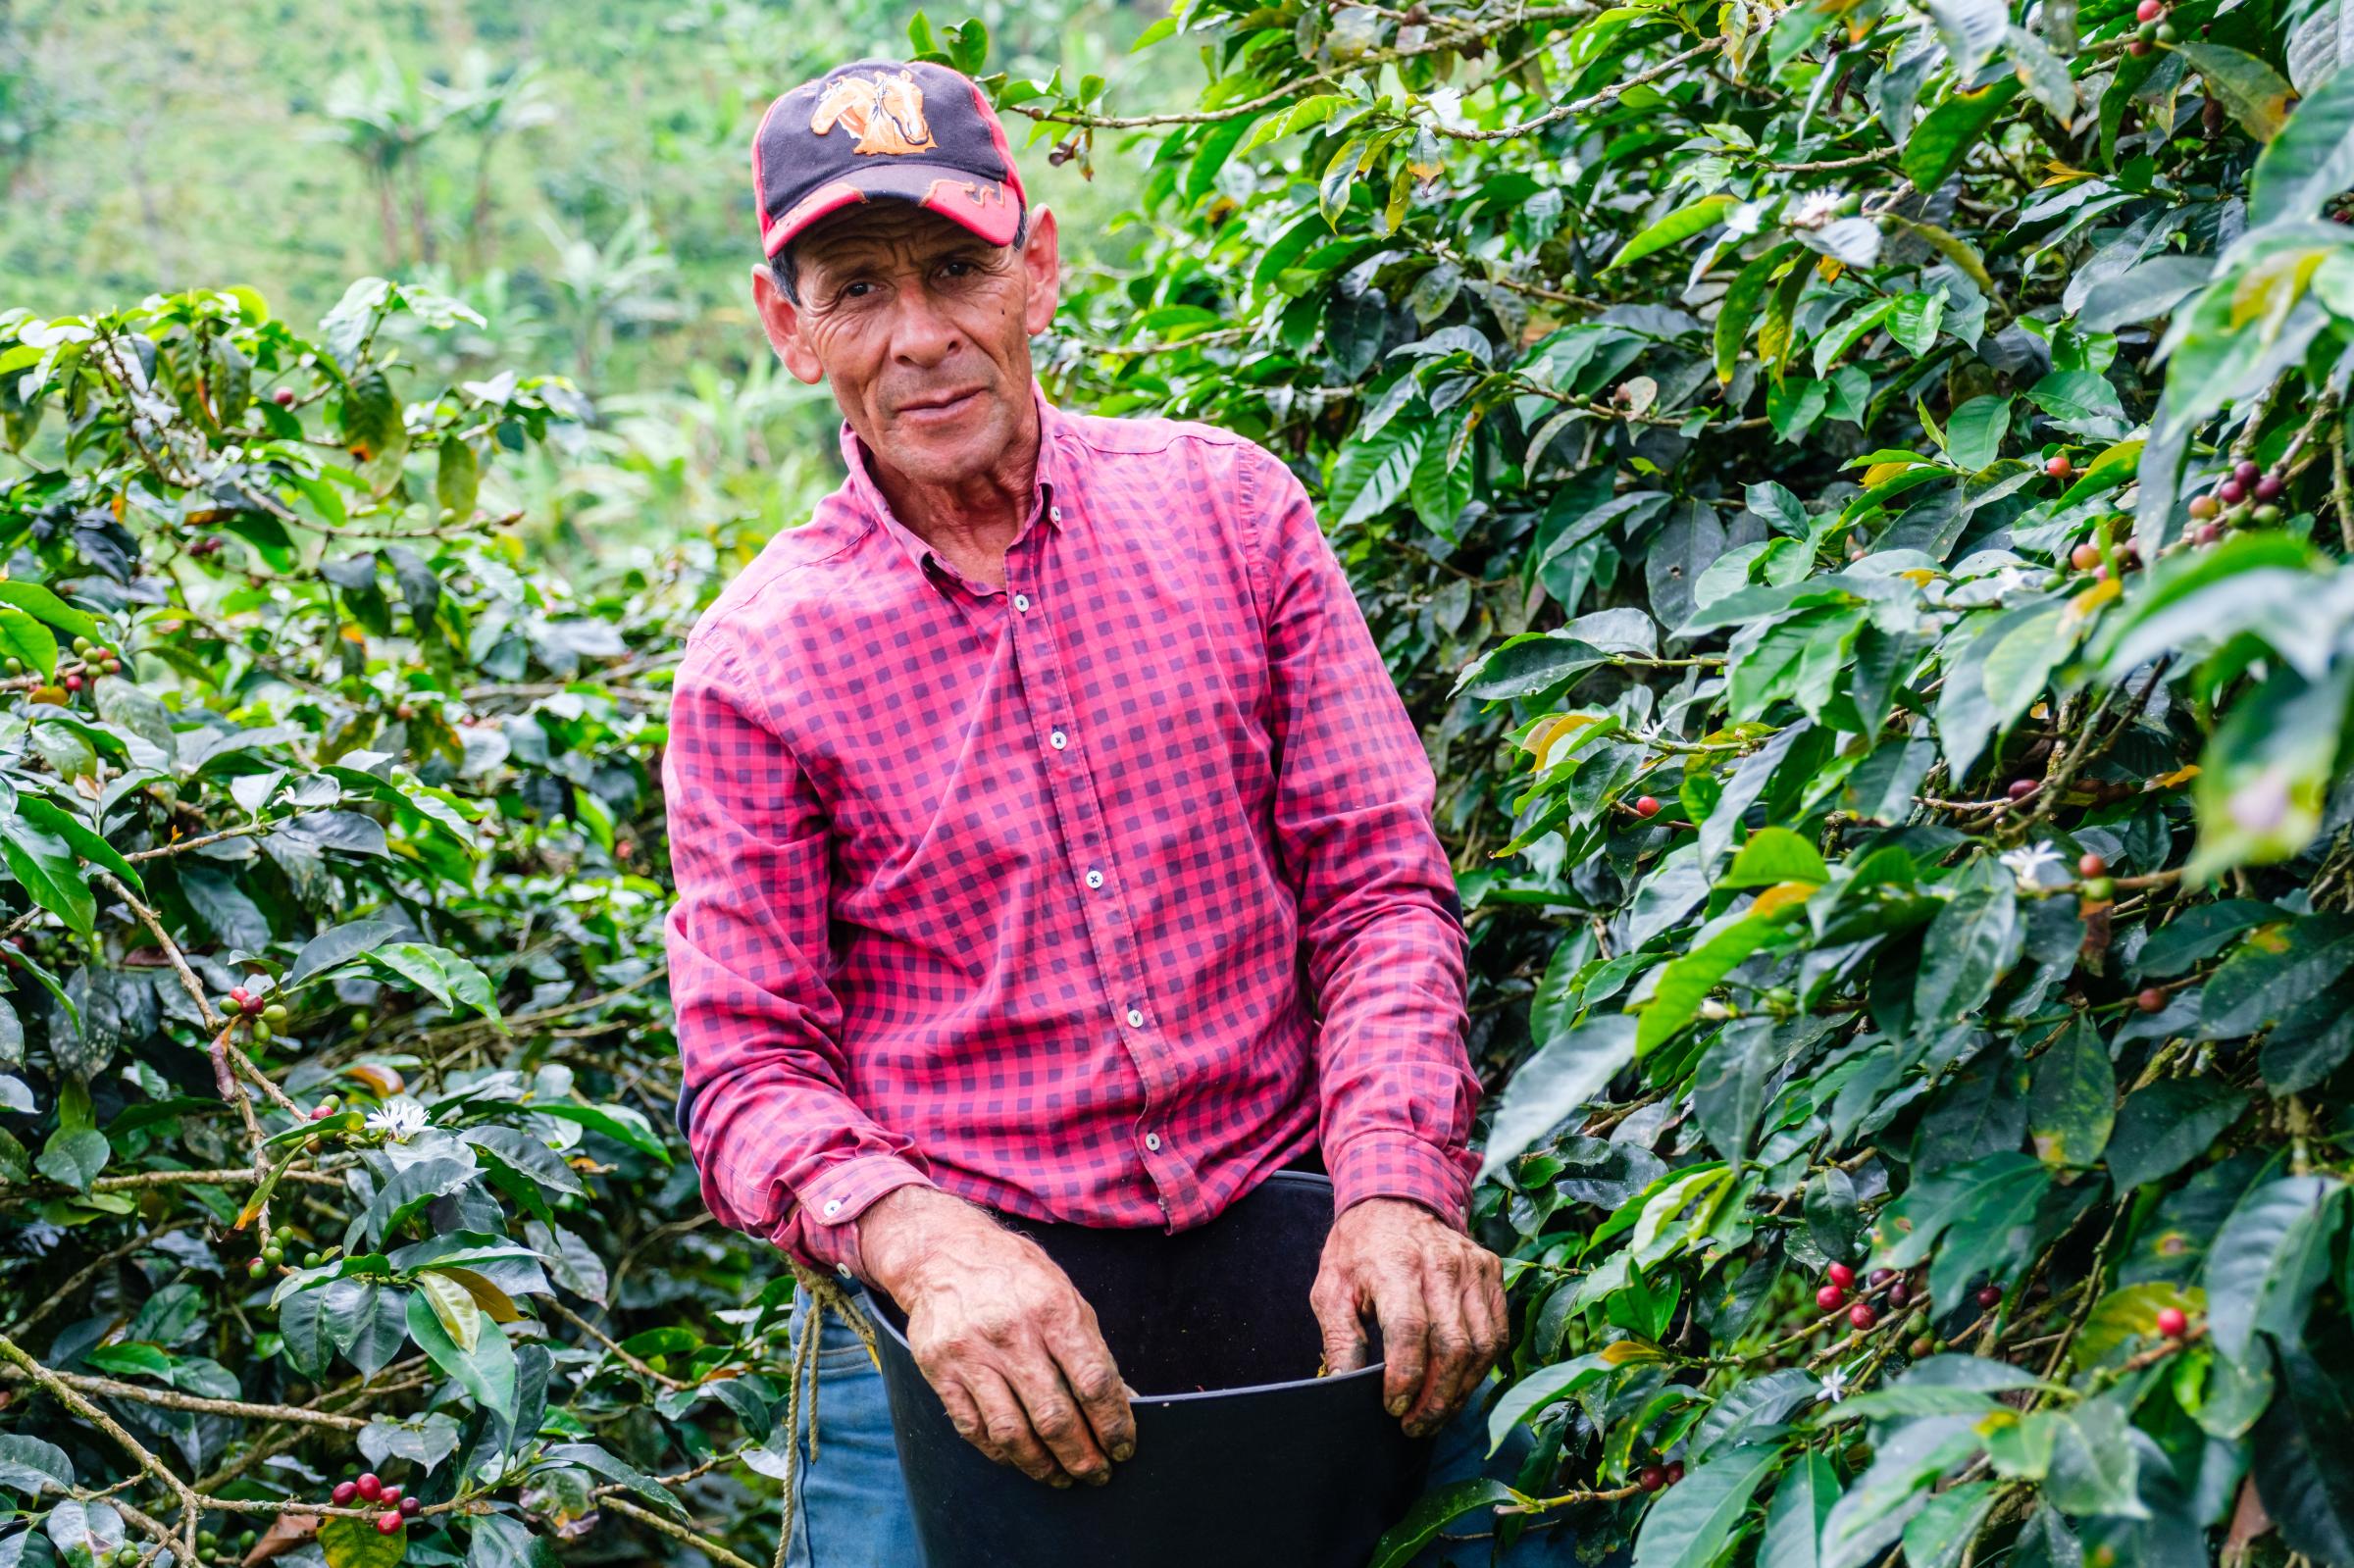 Eje Cafetero Colombia - A worker recolects coffee beans at Finca Las Acacias, Eje...